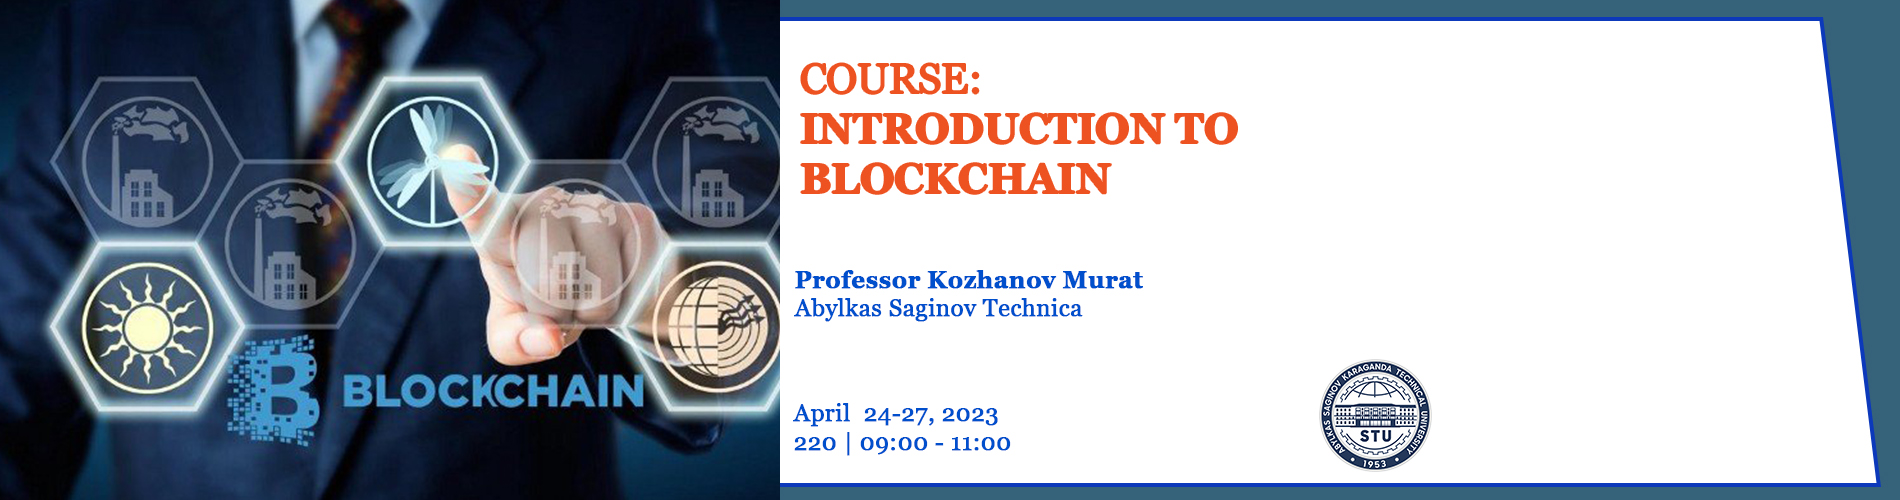 20230424_-20230427_-Introduction_to_Blockchain